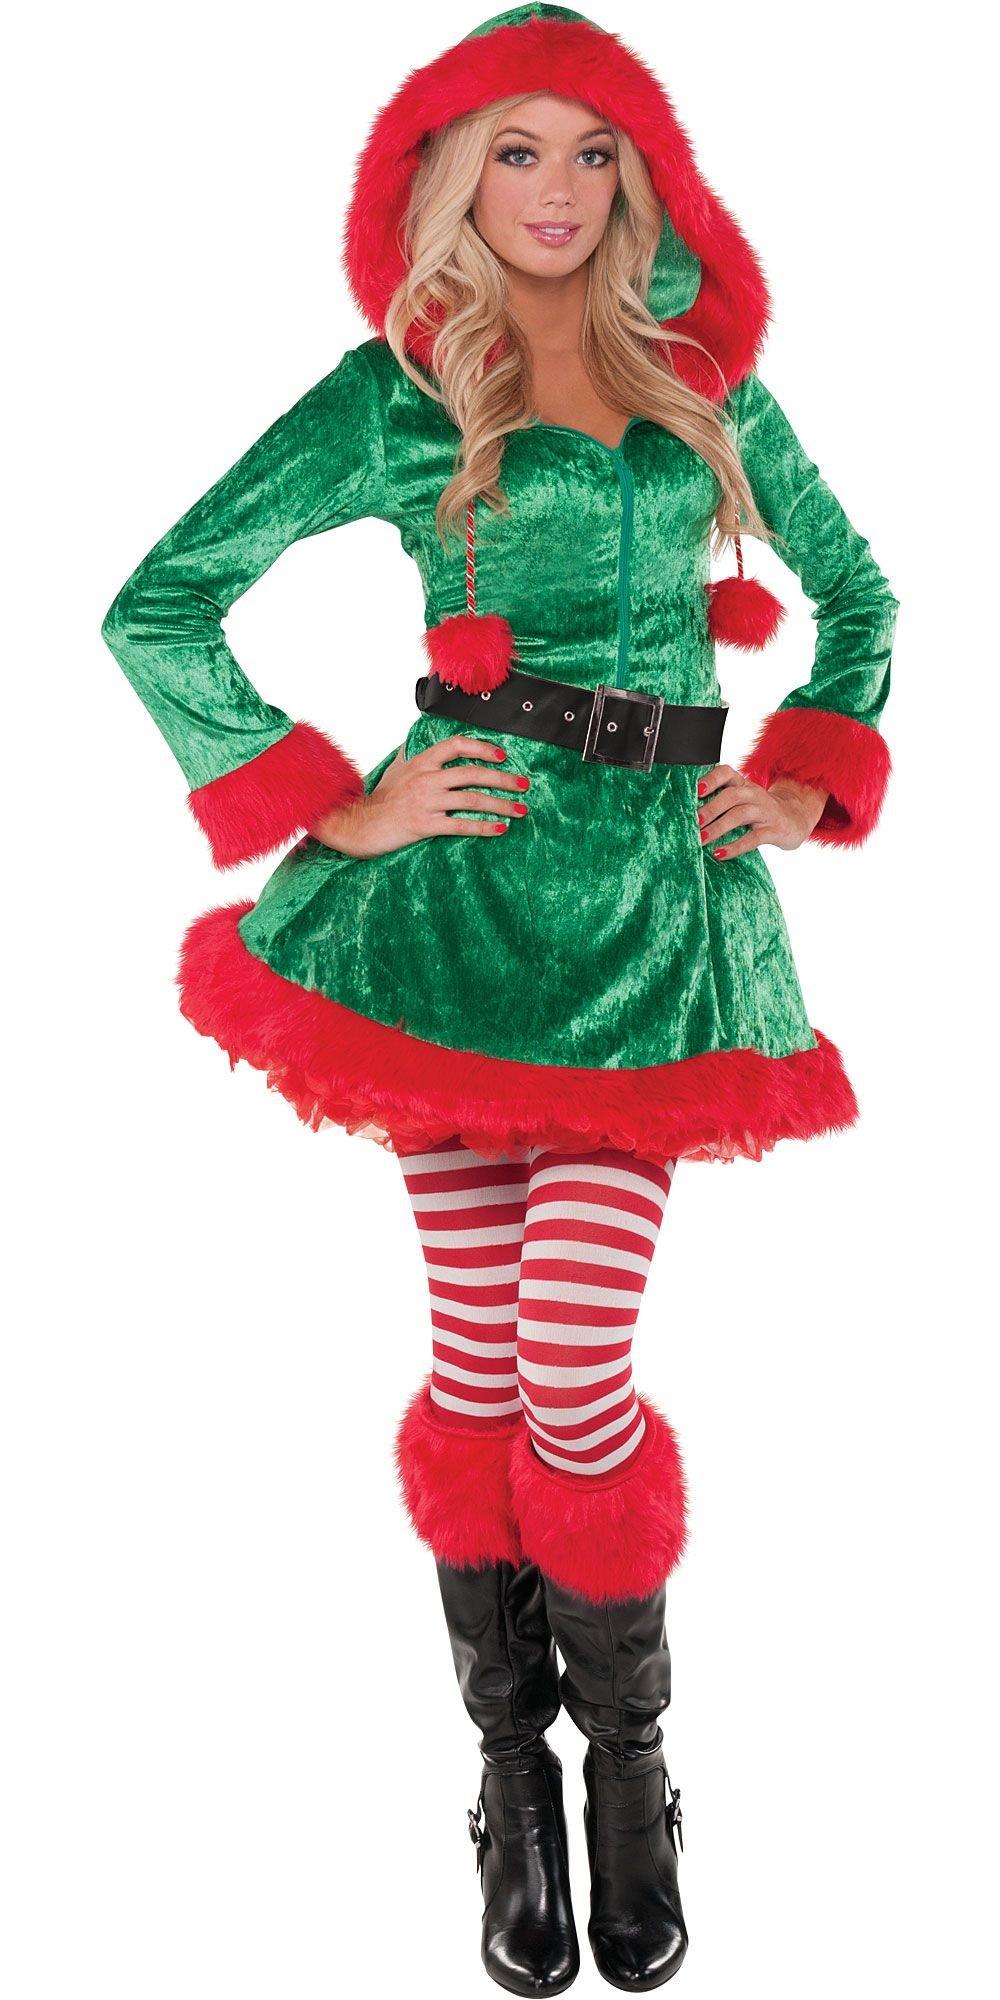 Sassy Elf Costume for Women | Party City